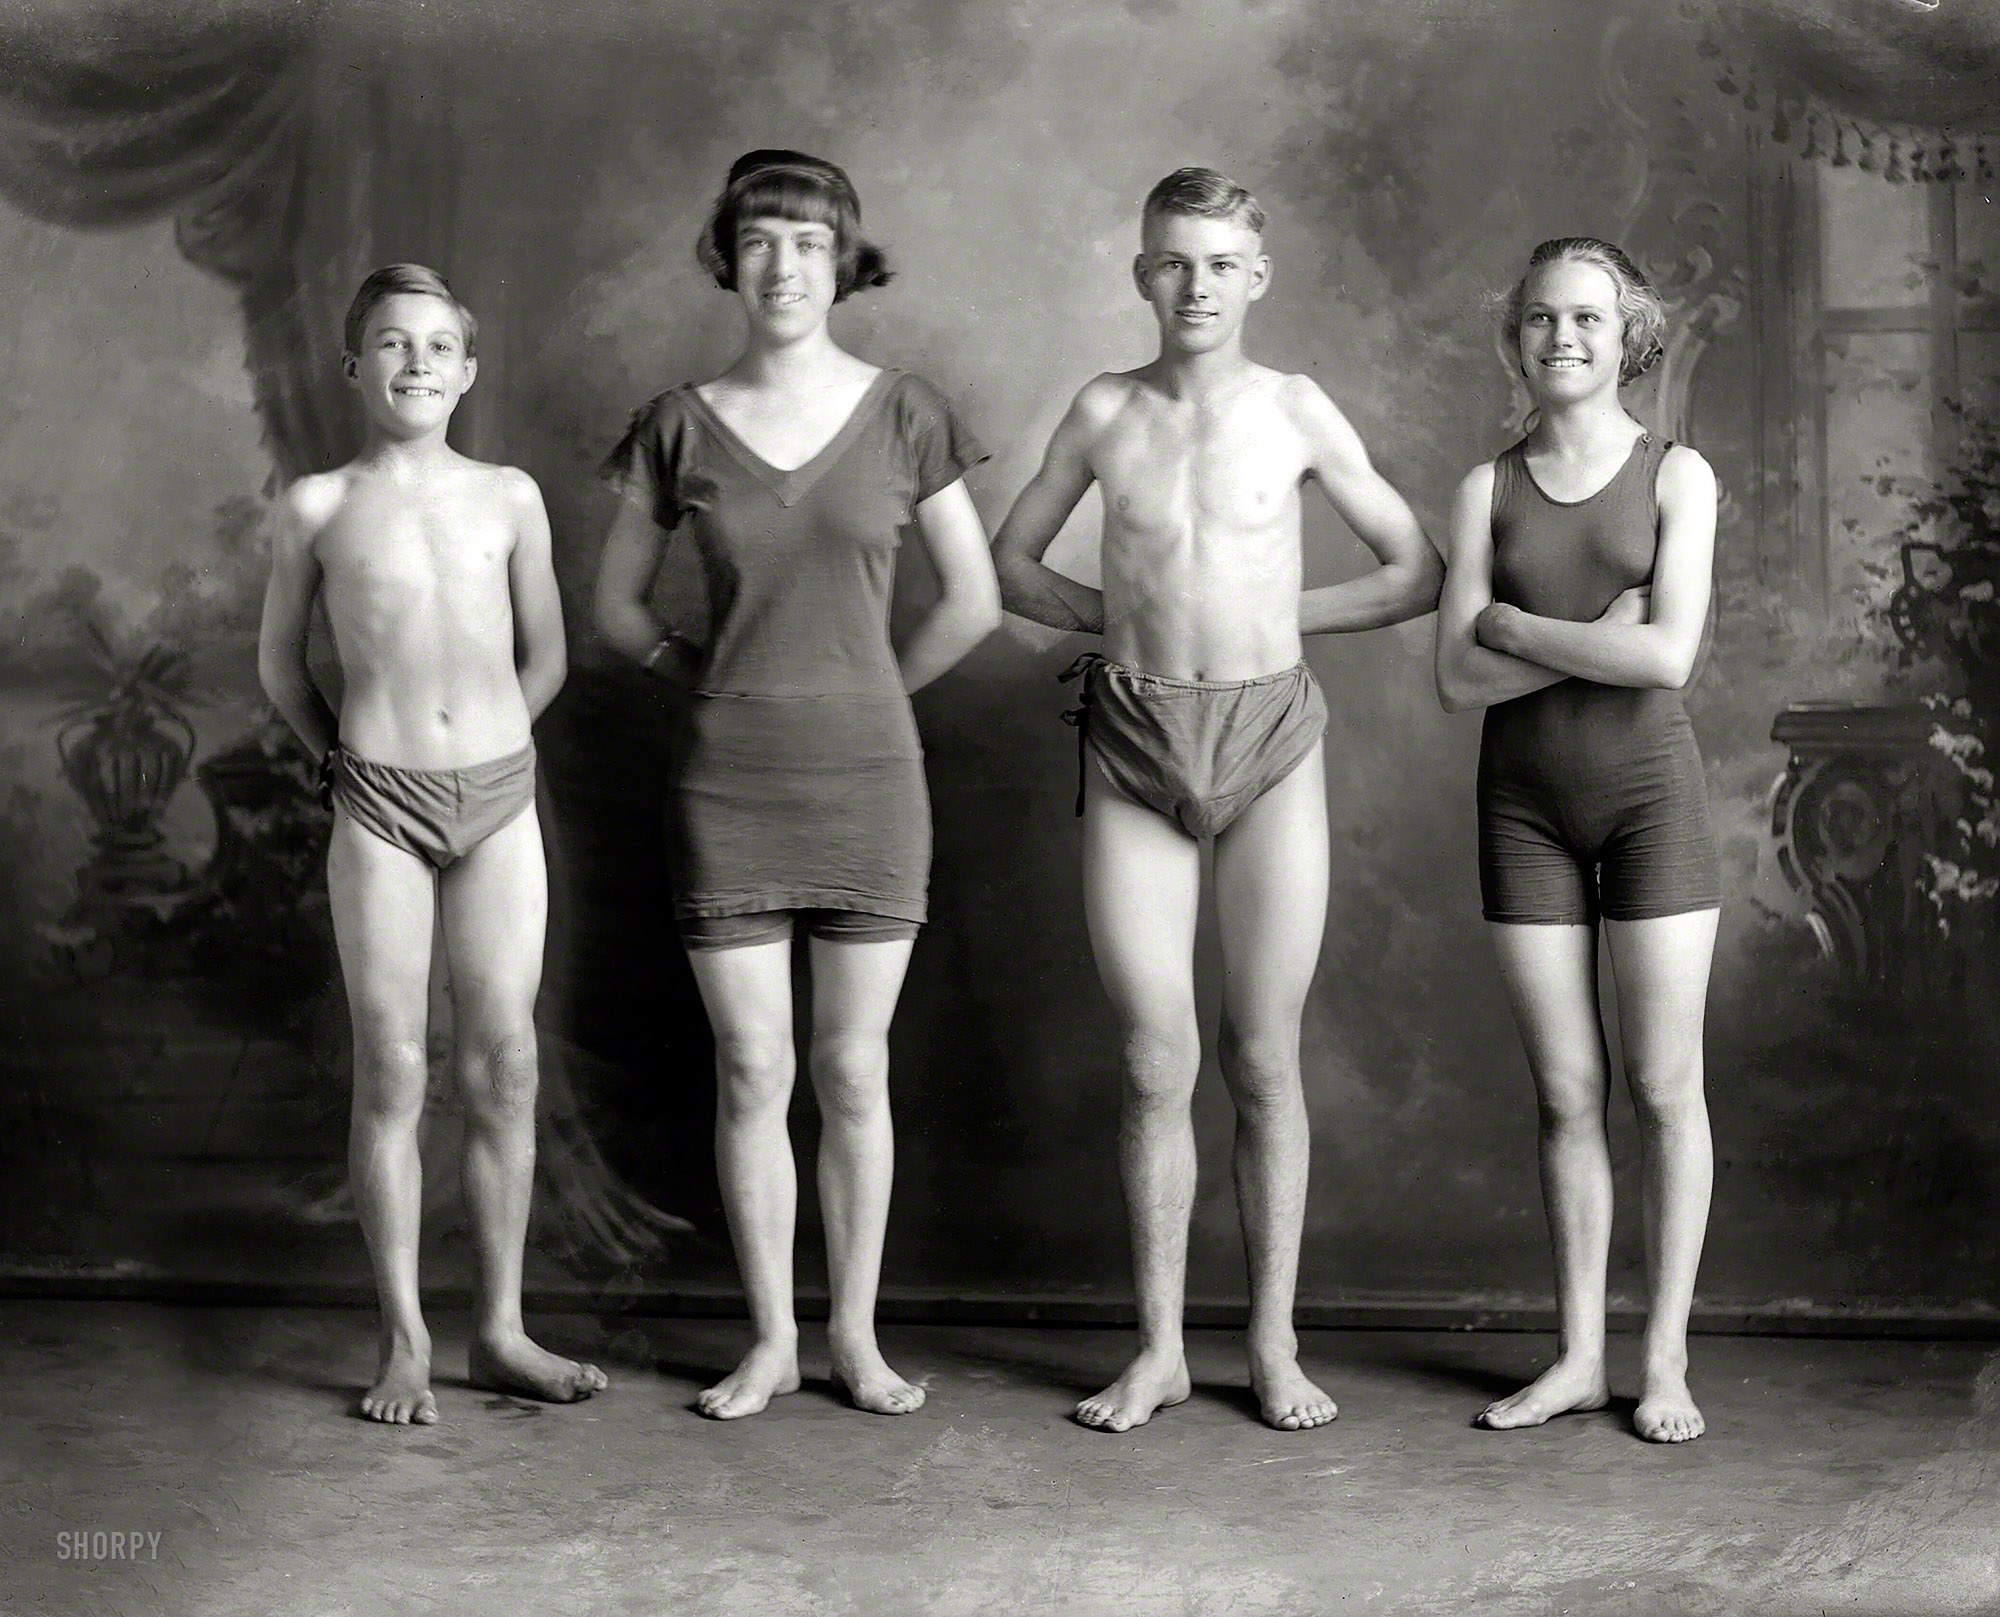 Circa 1920, more trend-setting swimwear from New Zealand. "Young people in swimming costumes, Christchurch." Glass plate by Adam Maclay. View full size.